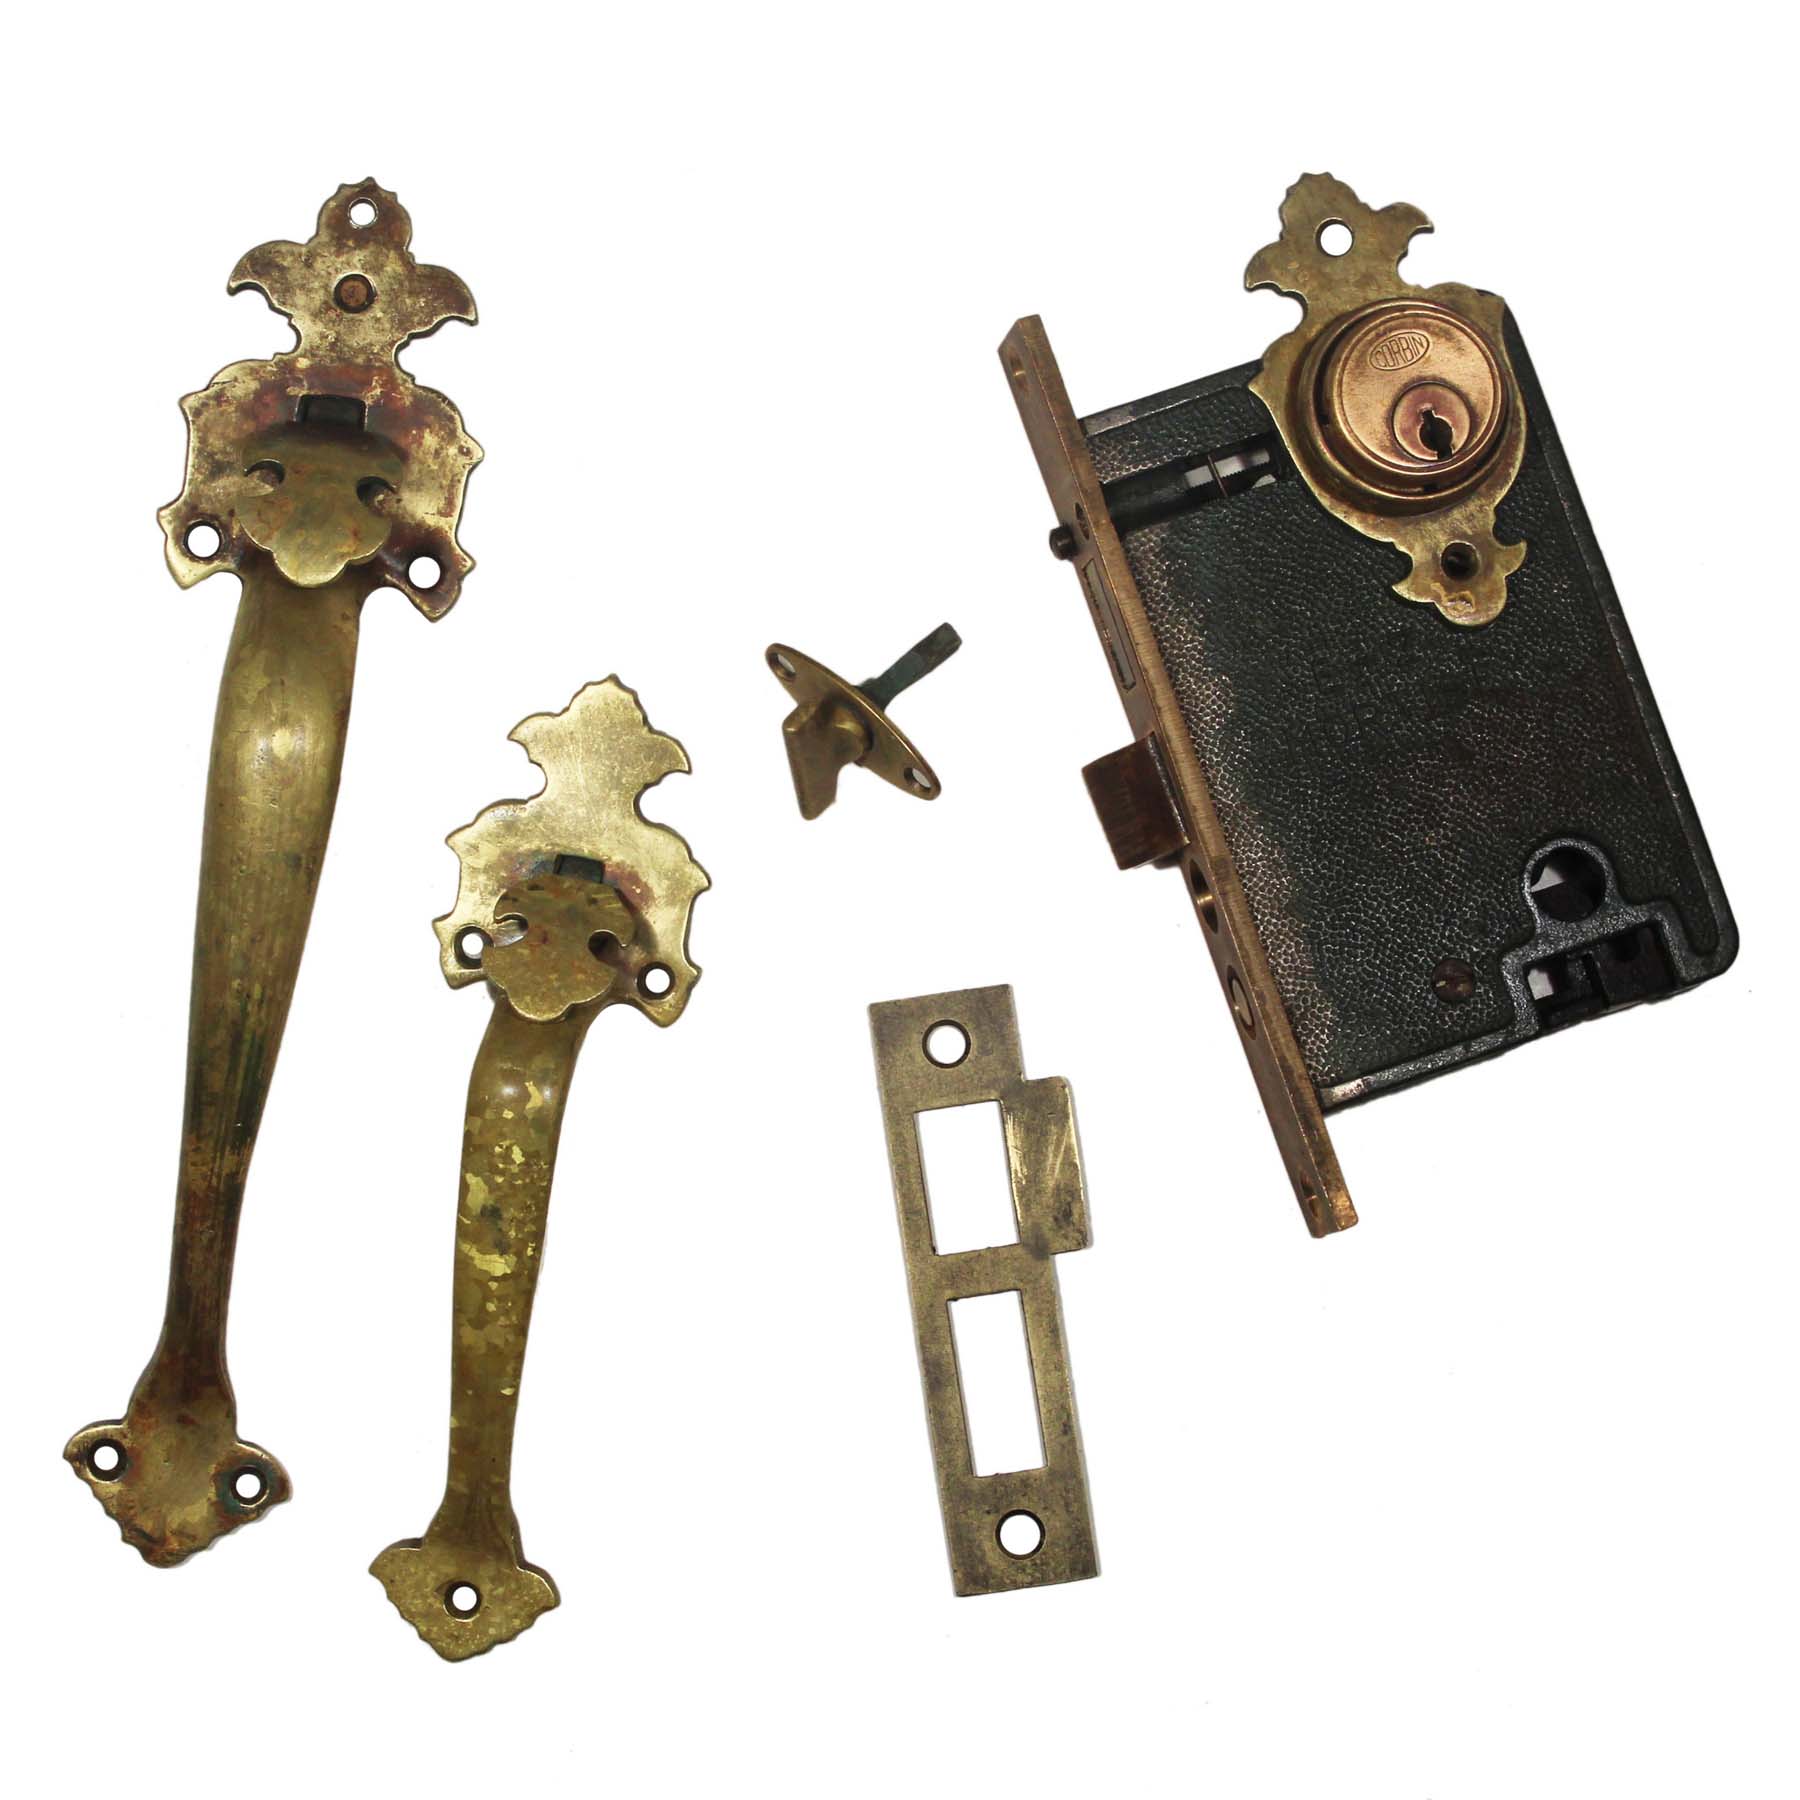 SOLD Complete Brass Thumb Latch Entry Set by Welch, Antique Hardware-0